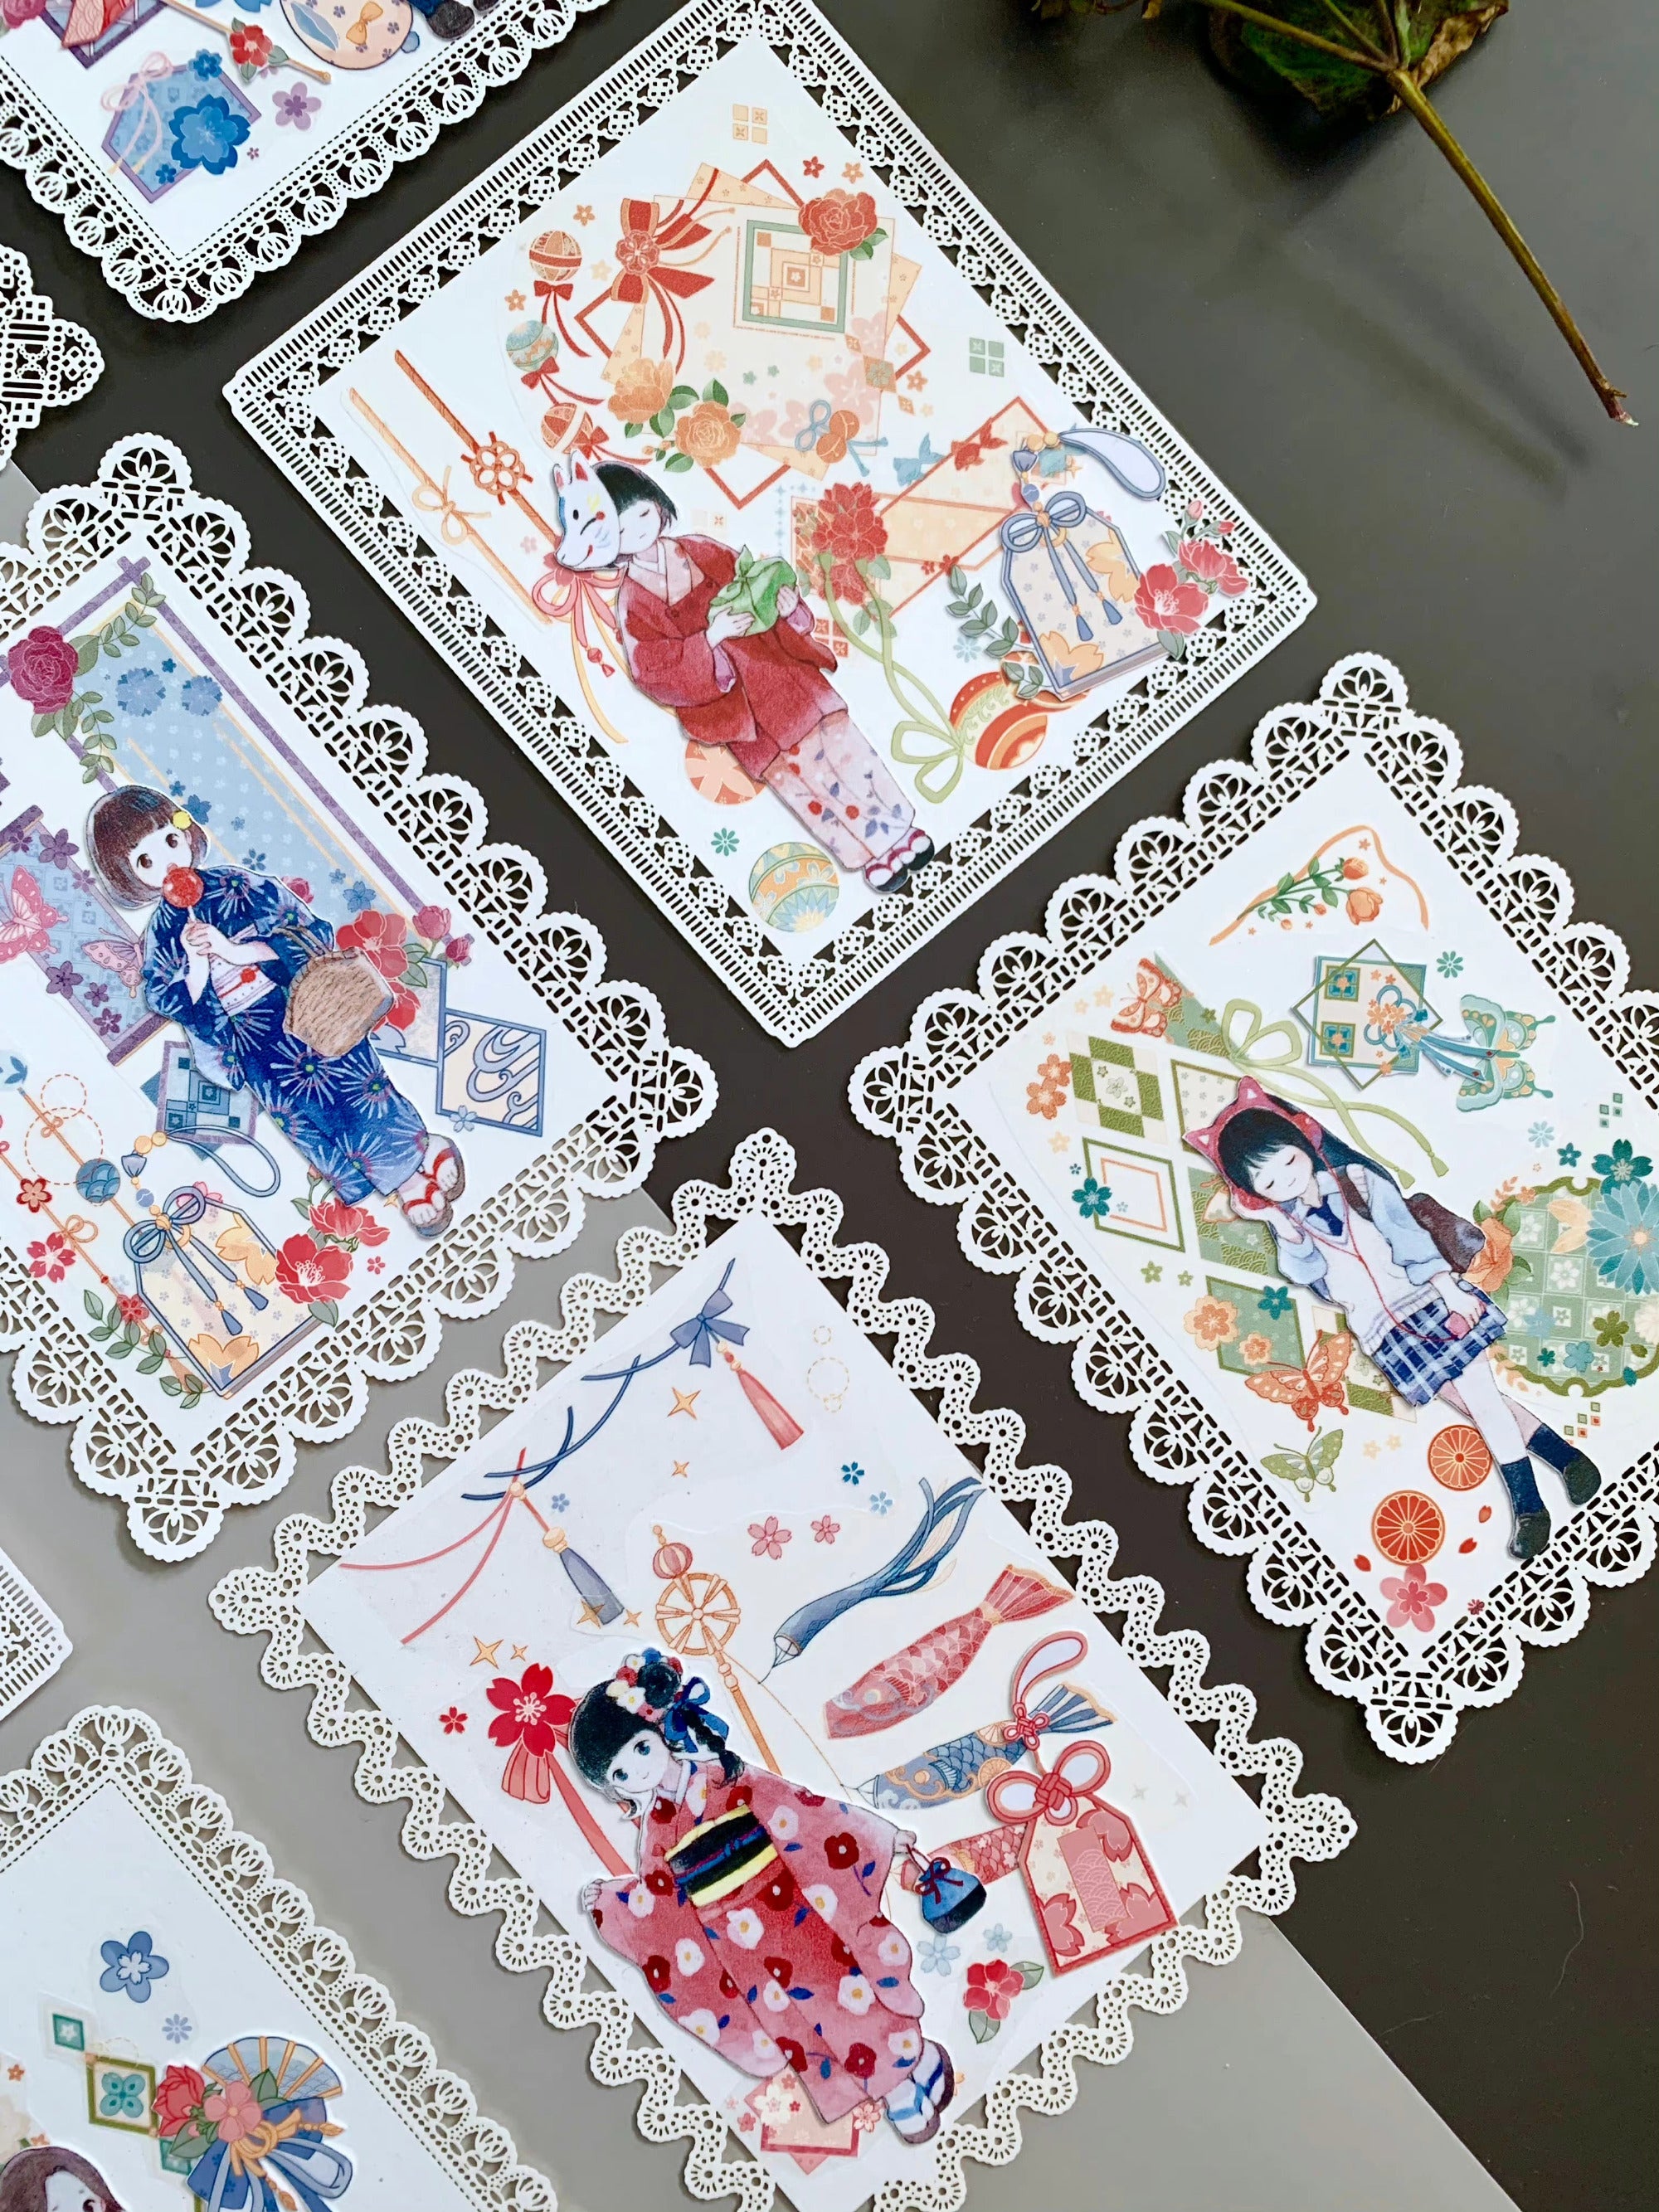 Tianxiaobao's Starry Sky: The Girls Masking Tape